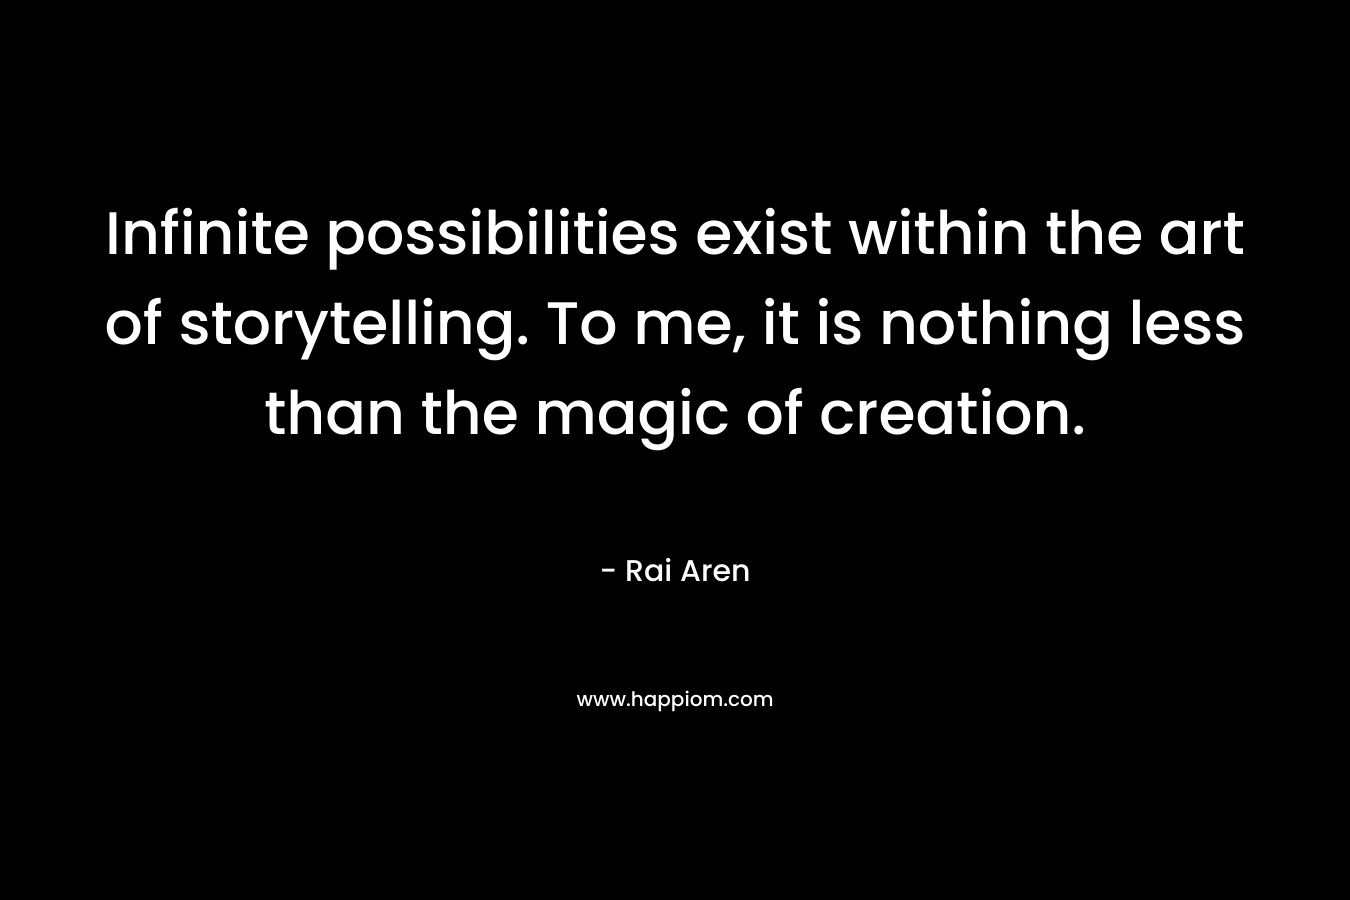 Infinite possibilities exist within the art of storytelling. To me, it is nothing less than the magic of creation.